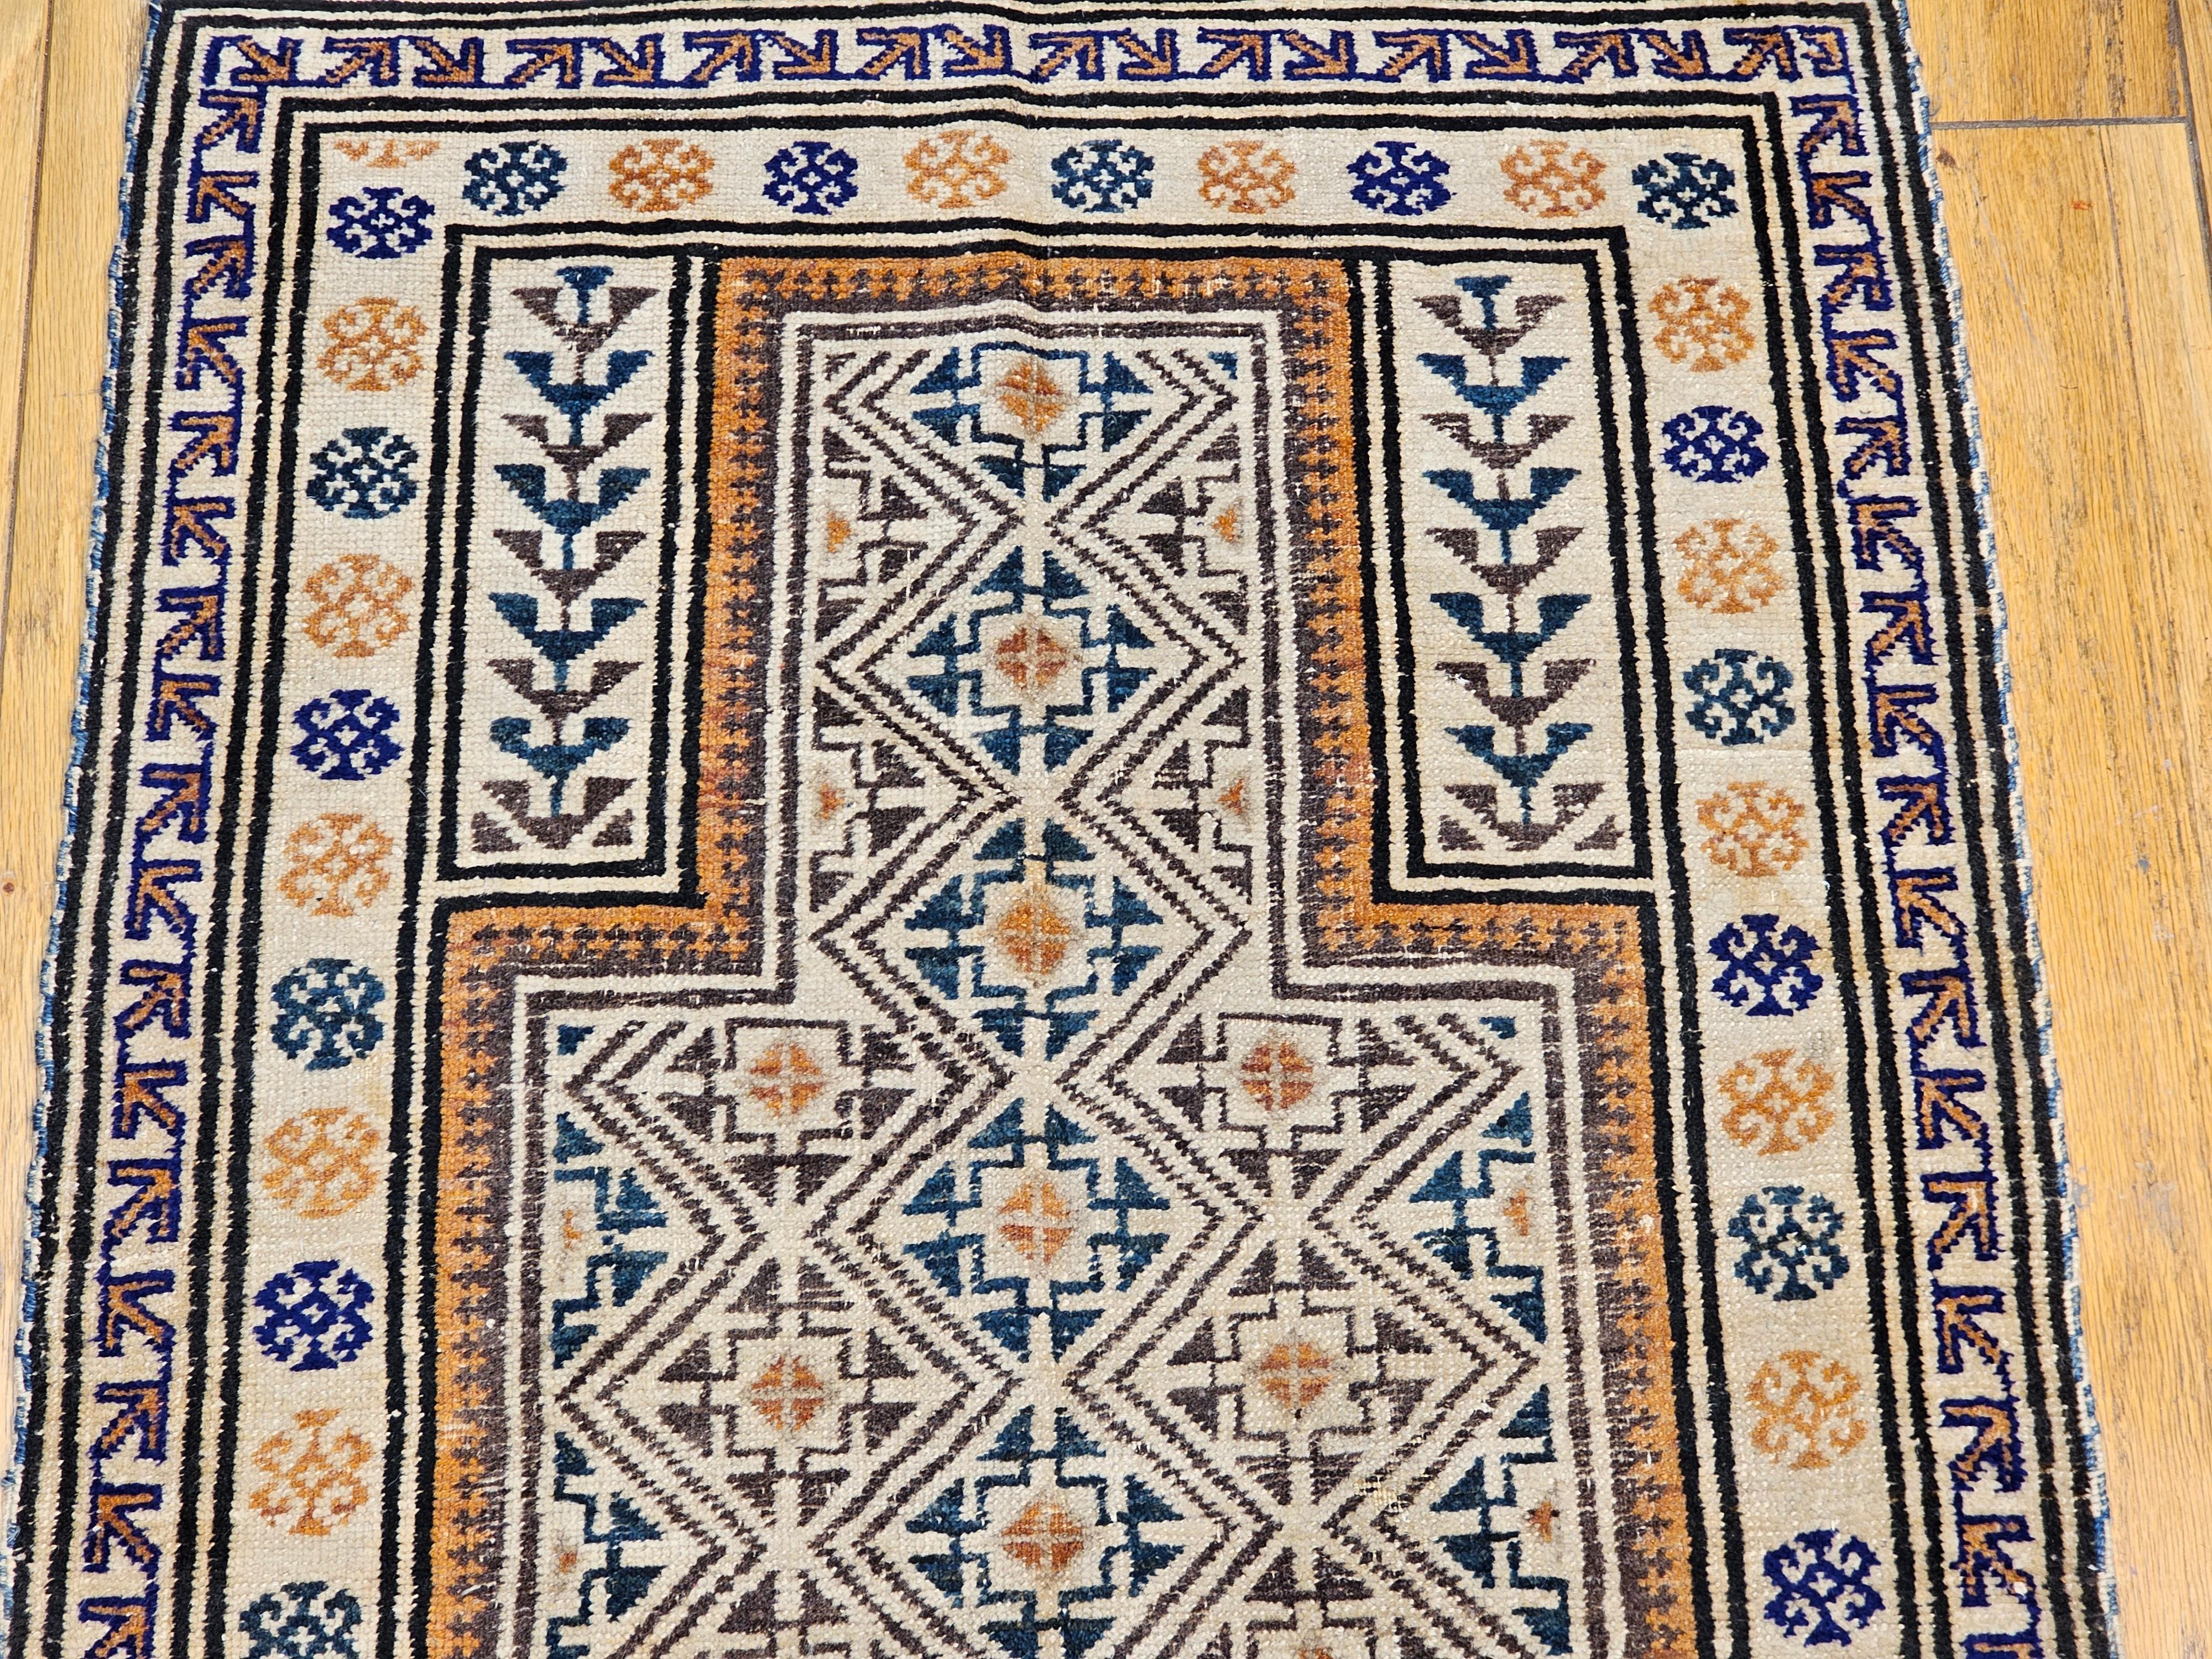 Early 20th Century Persian Baluch Prayer Rug Pattern in Ivory, Brown, Navy Blue In Good Condition For Sale In Barrington, IL